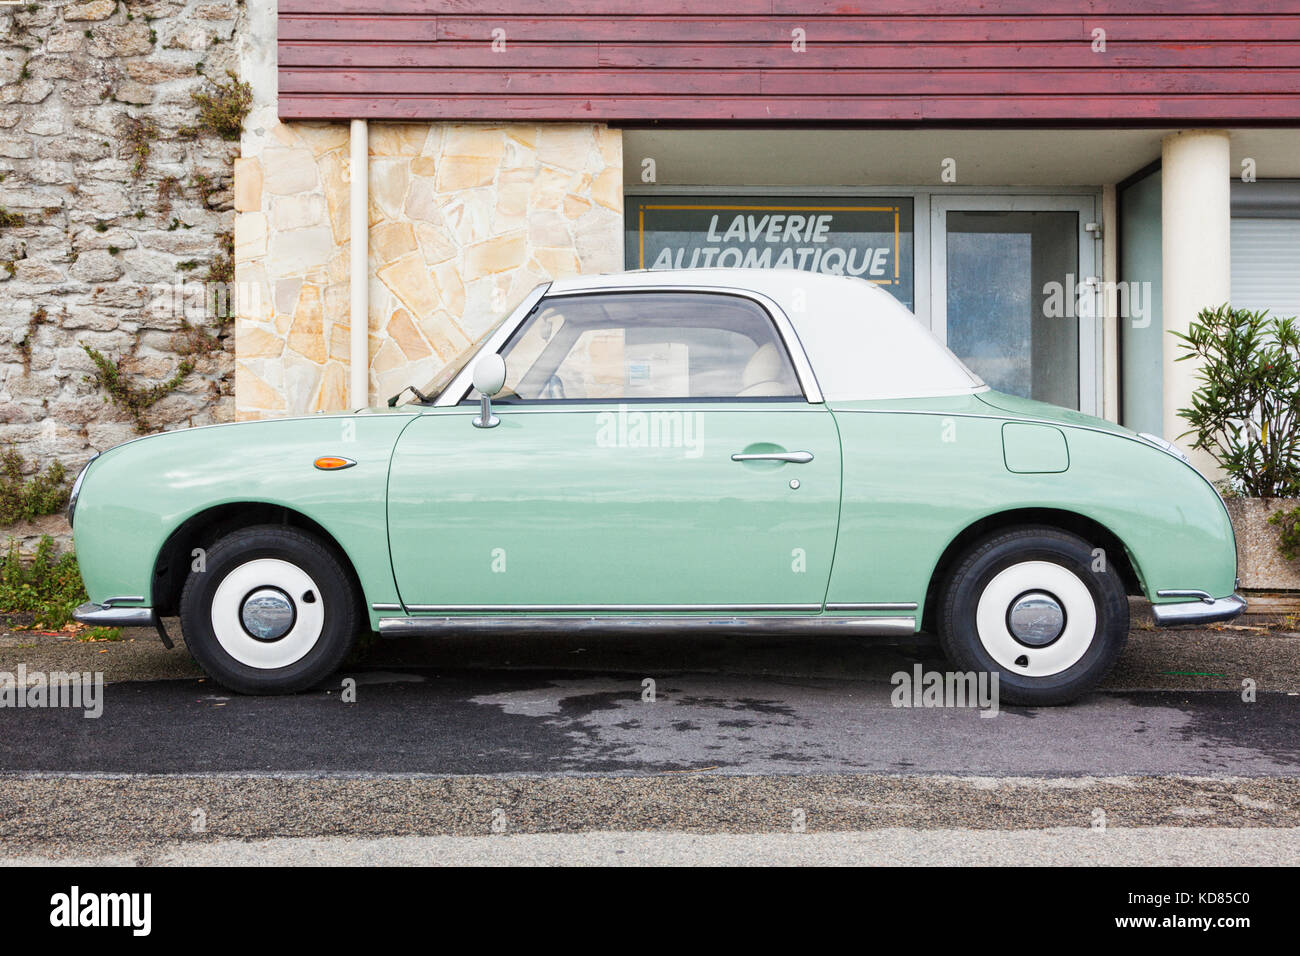 Quiberon, France - September 17, 2017: An emerald green vintage Nissan Figaro in front of a launderette. The Figaro is a retro-styled convertible manu Stock Photo